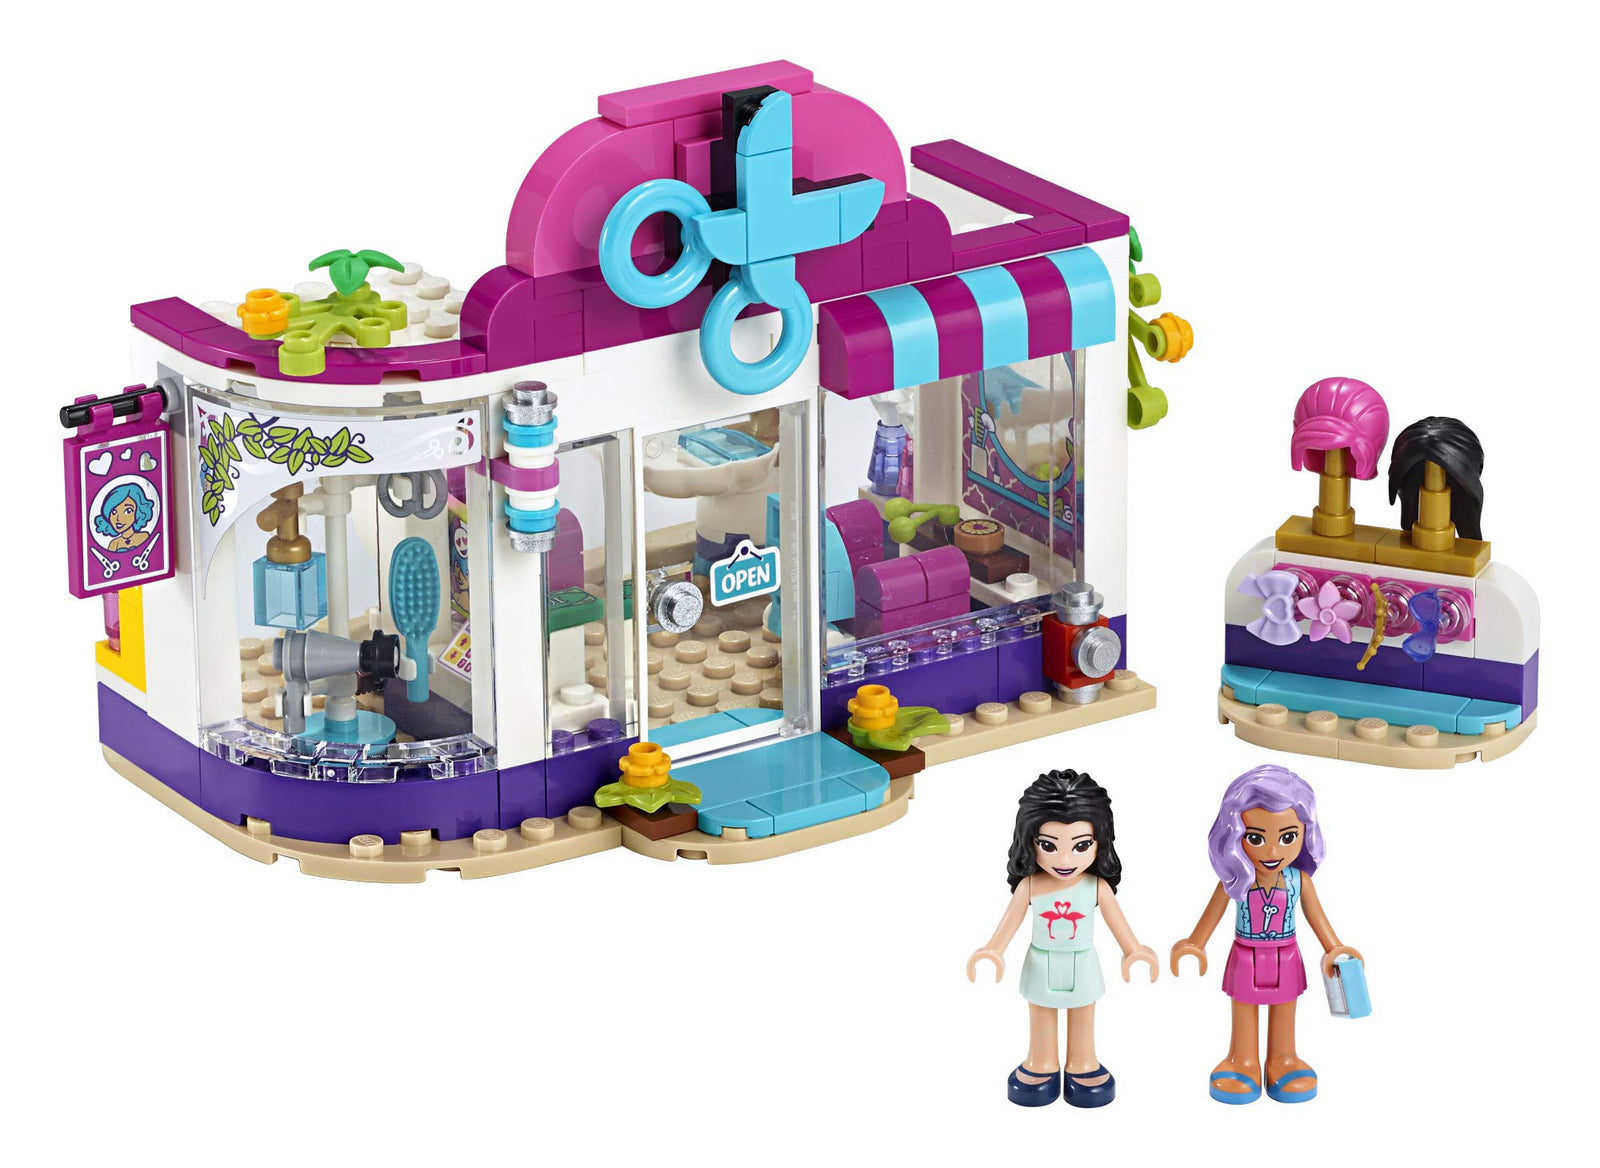 LEGO Friends Heartlake City Play Hair Salon Fun Toy 41391 Building Kit, Featuring Friends Character Emma (235 Pieces)